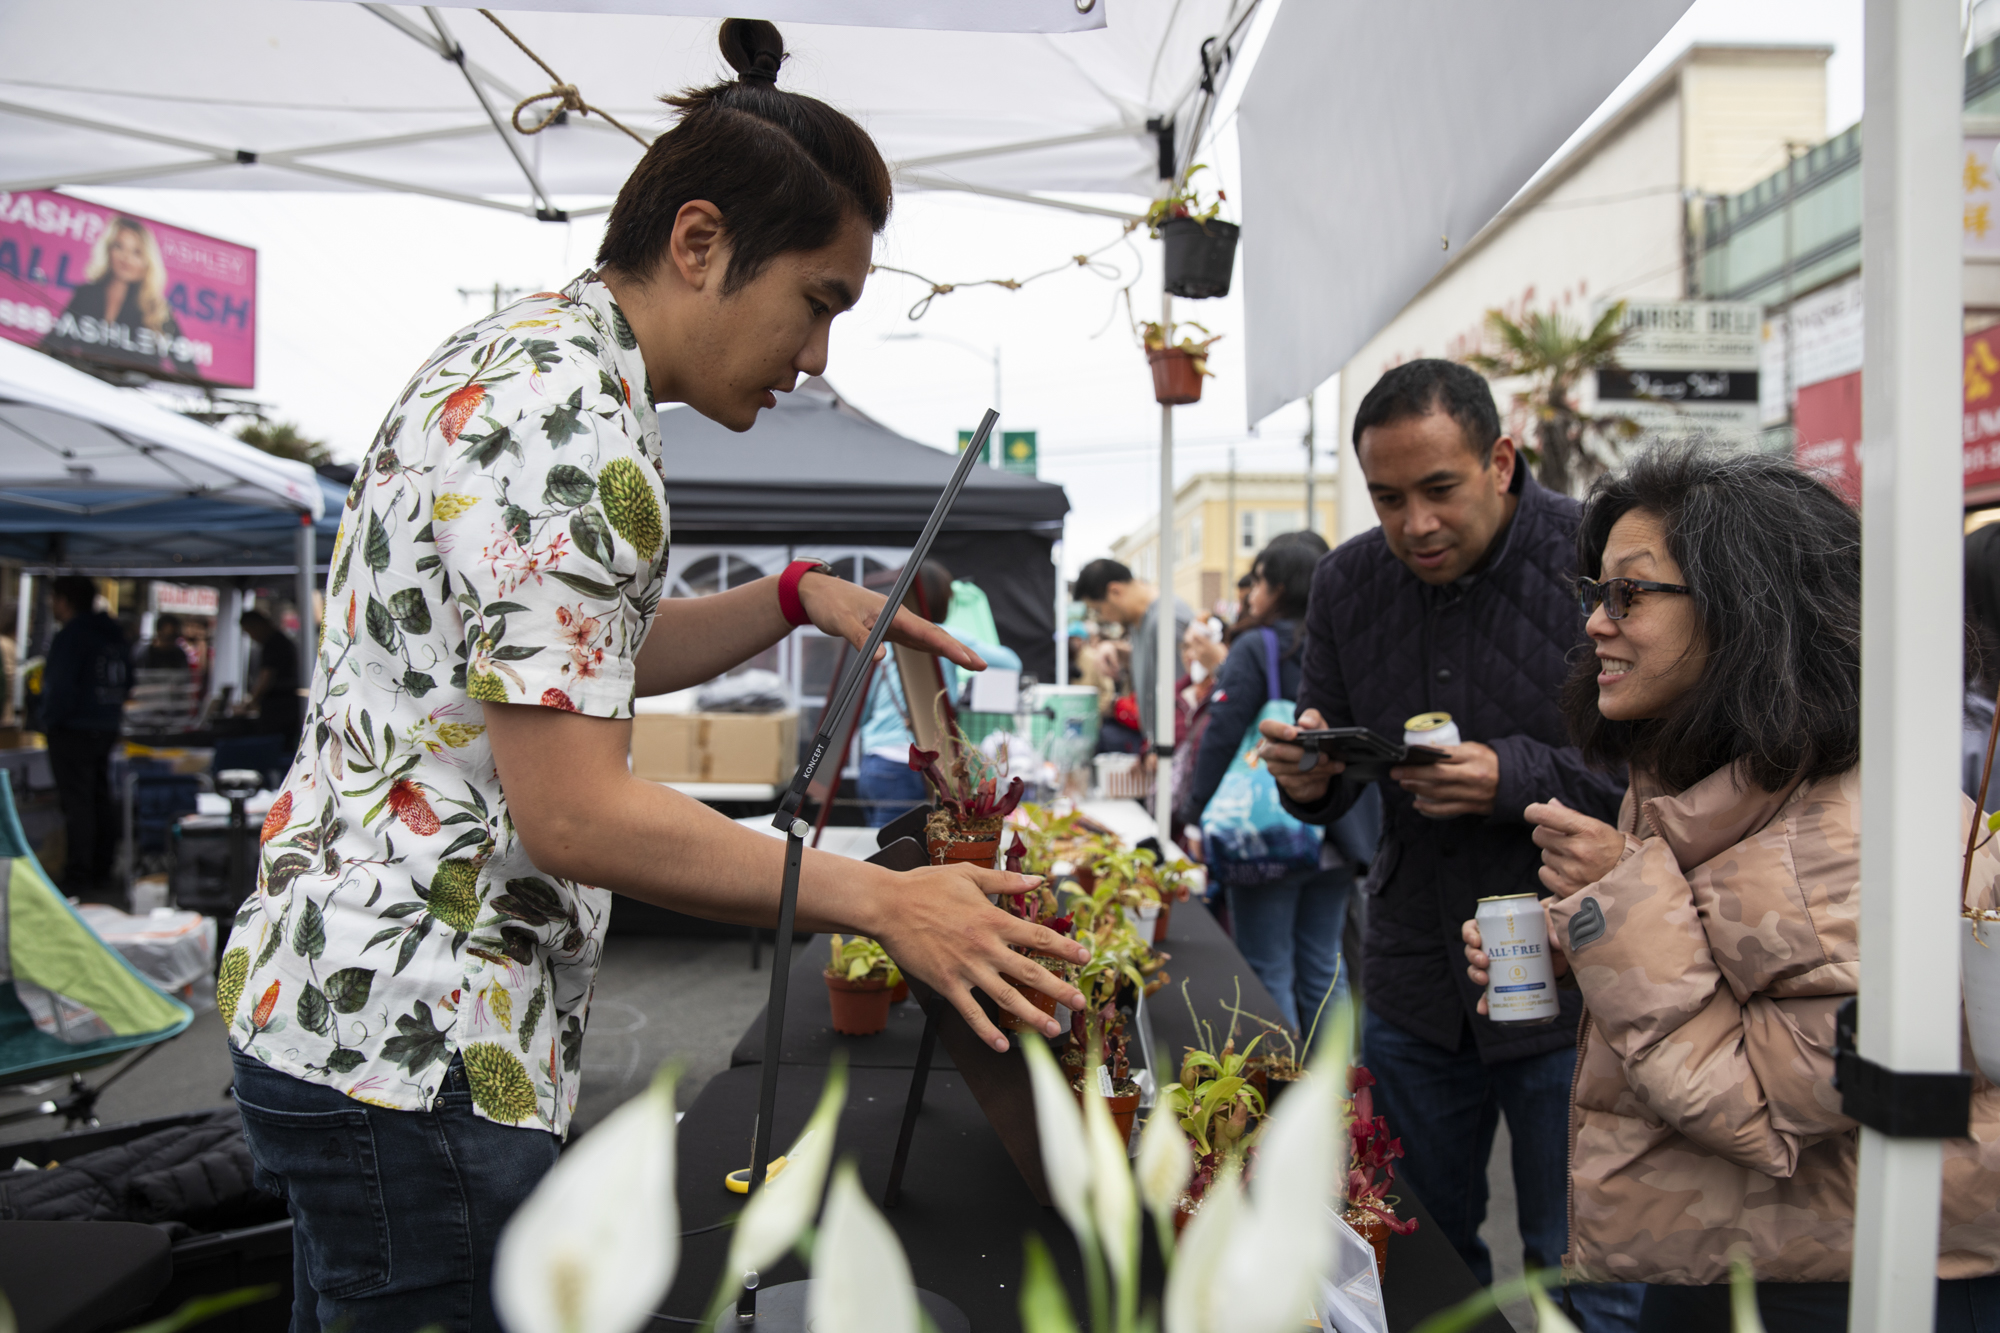 People interact with a vendor selling plants in an outdoor market.